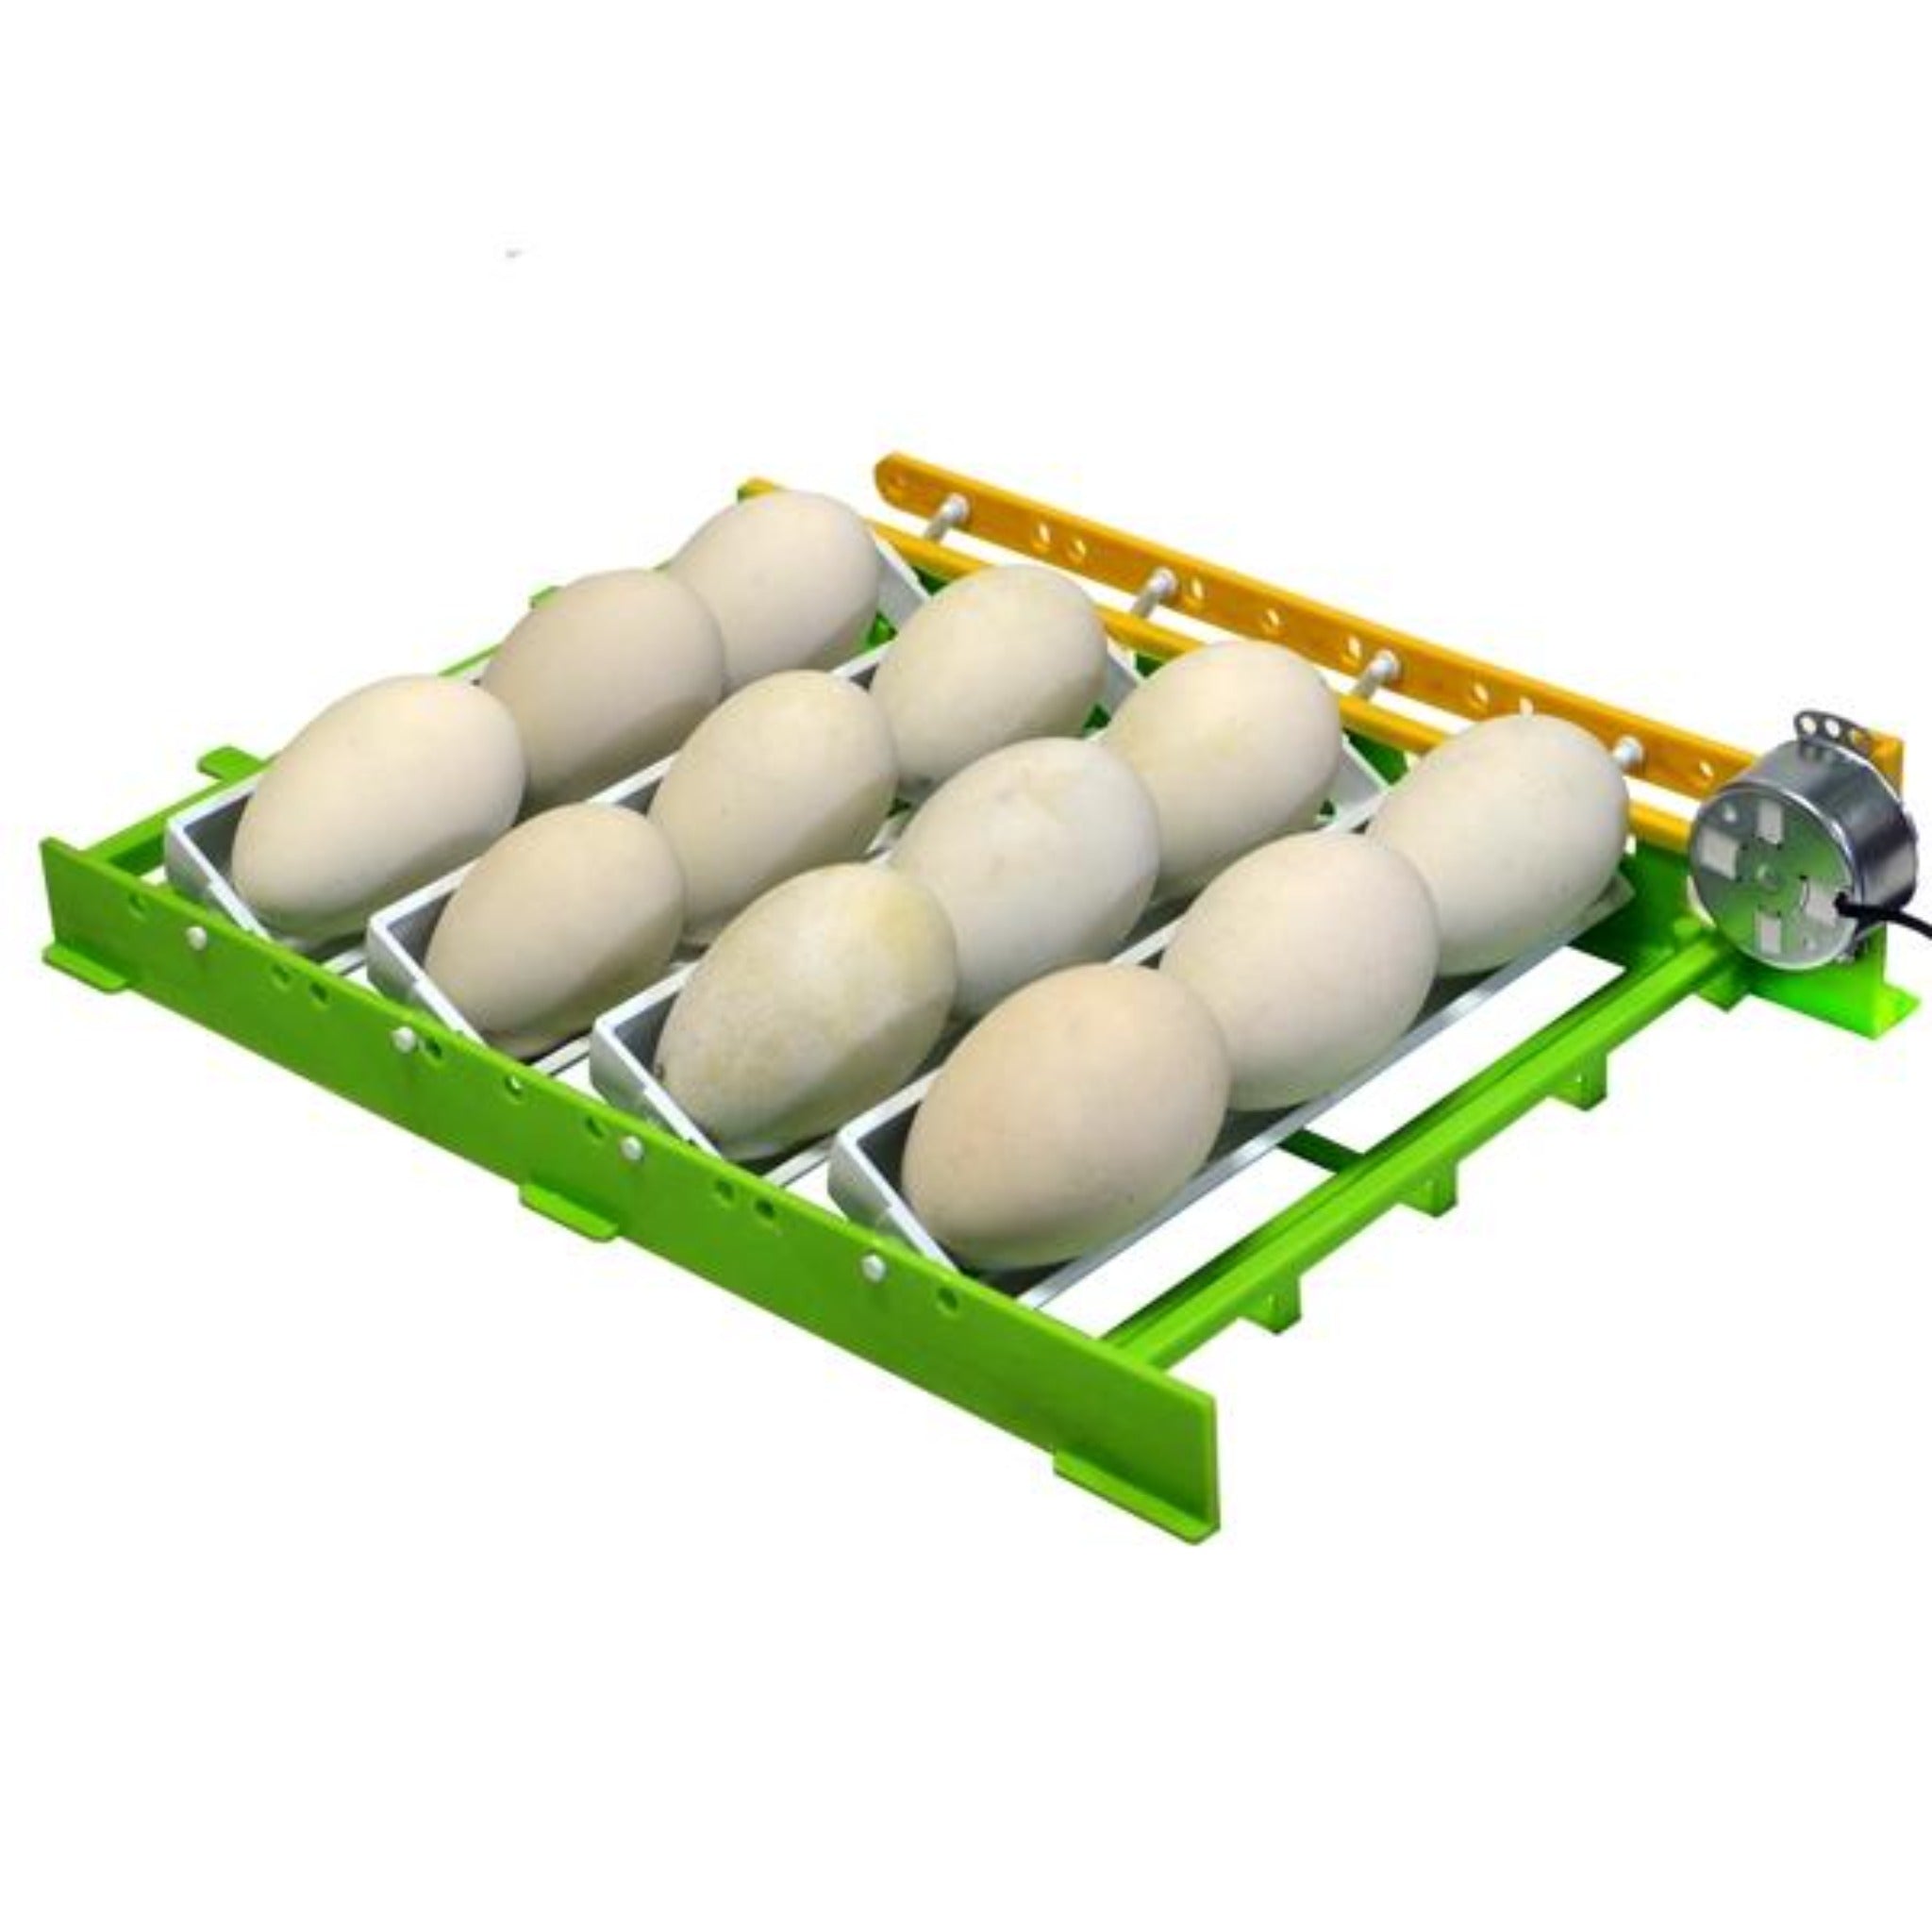 Hatching Time Cimuka. Egg turning rack can be seen with 12 eggs to show capacity.